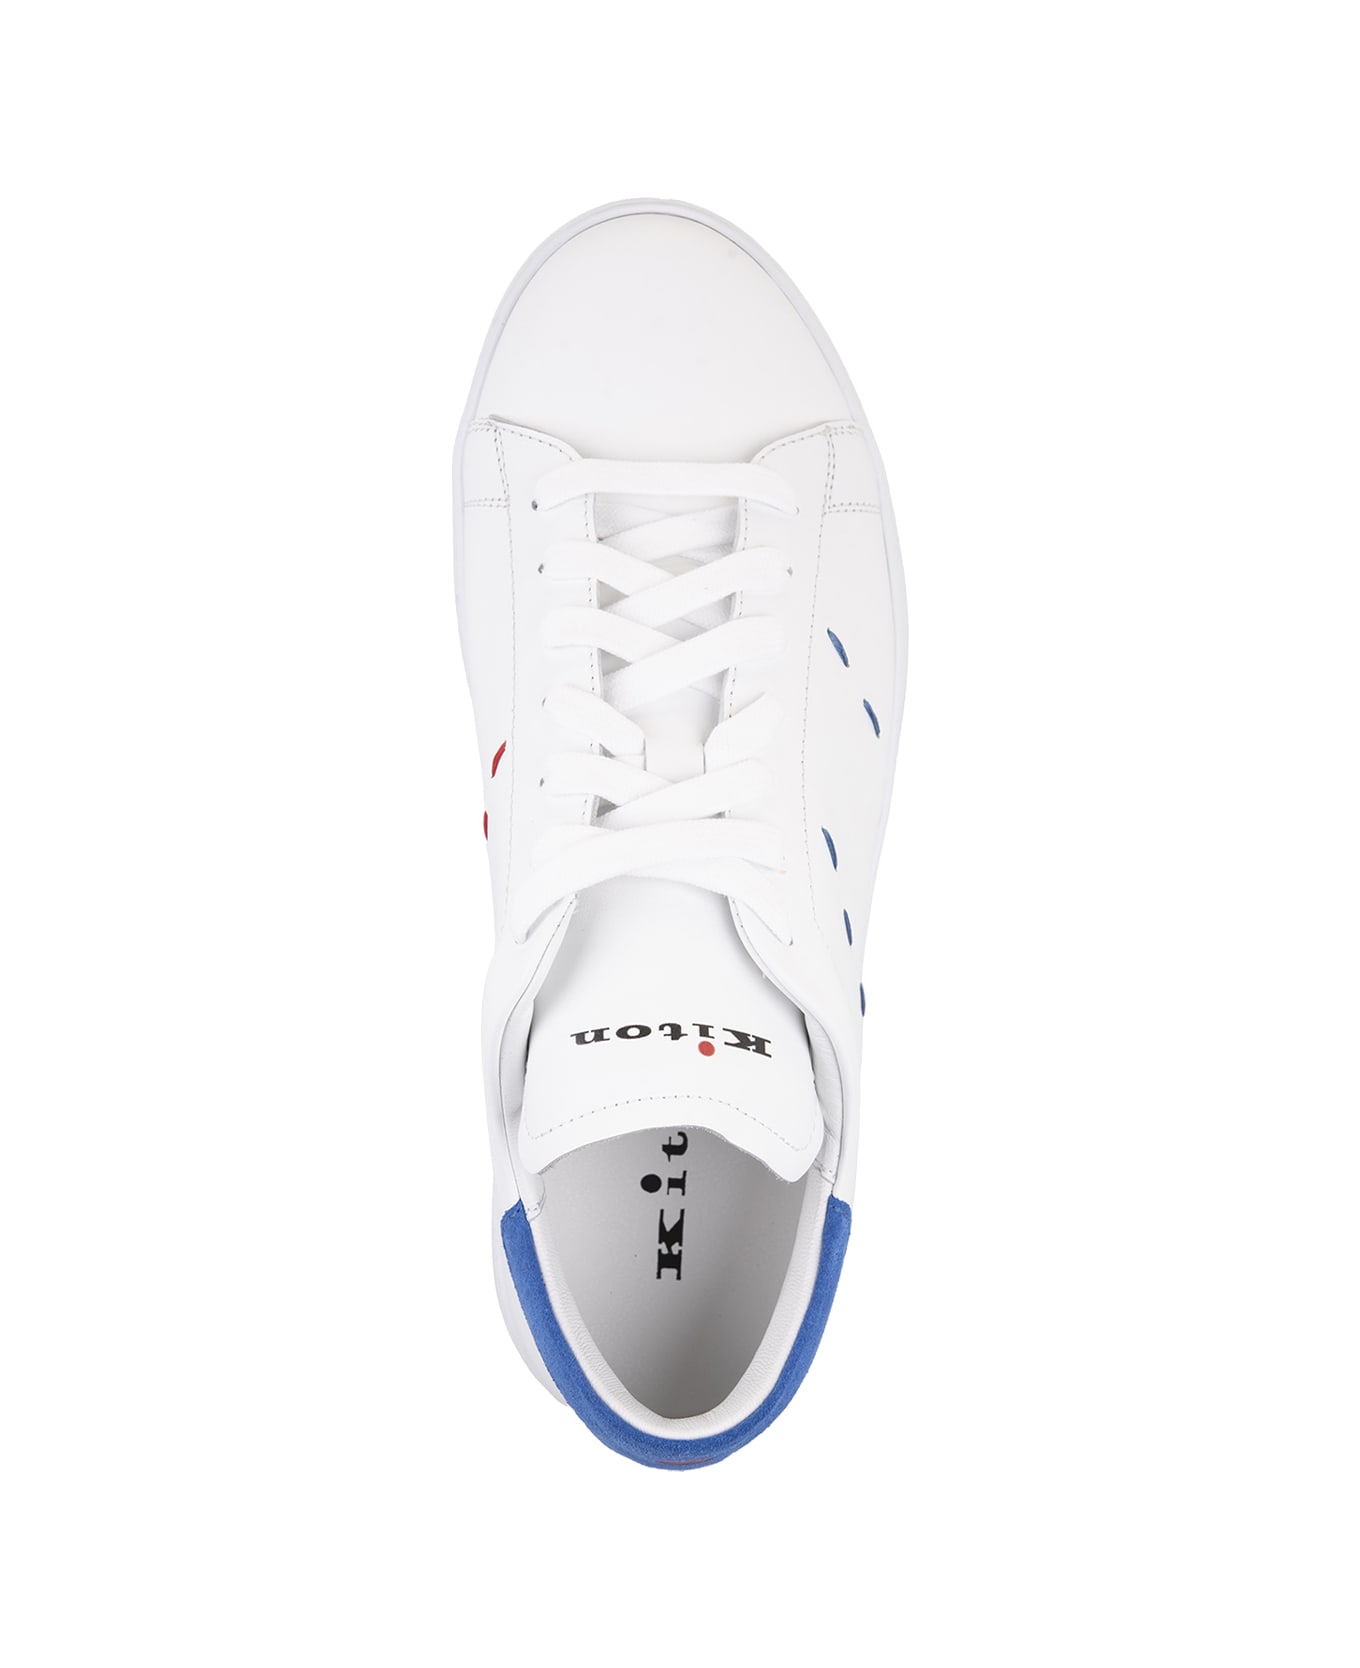 Kiton White Leather Sneakers With Blue Details - Blue スニーカー